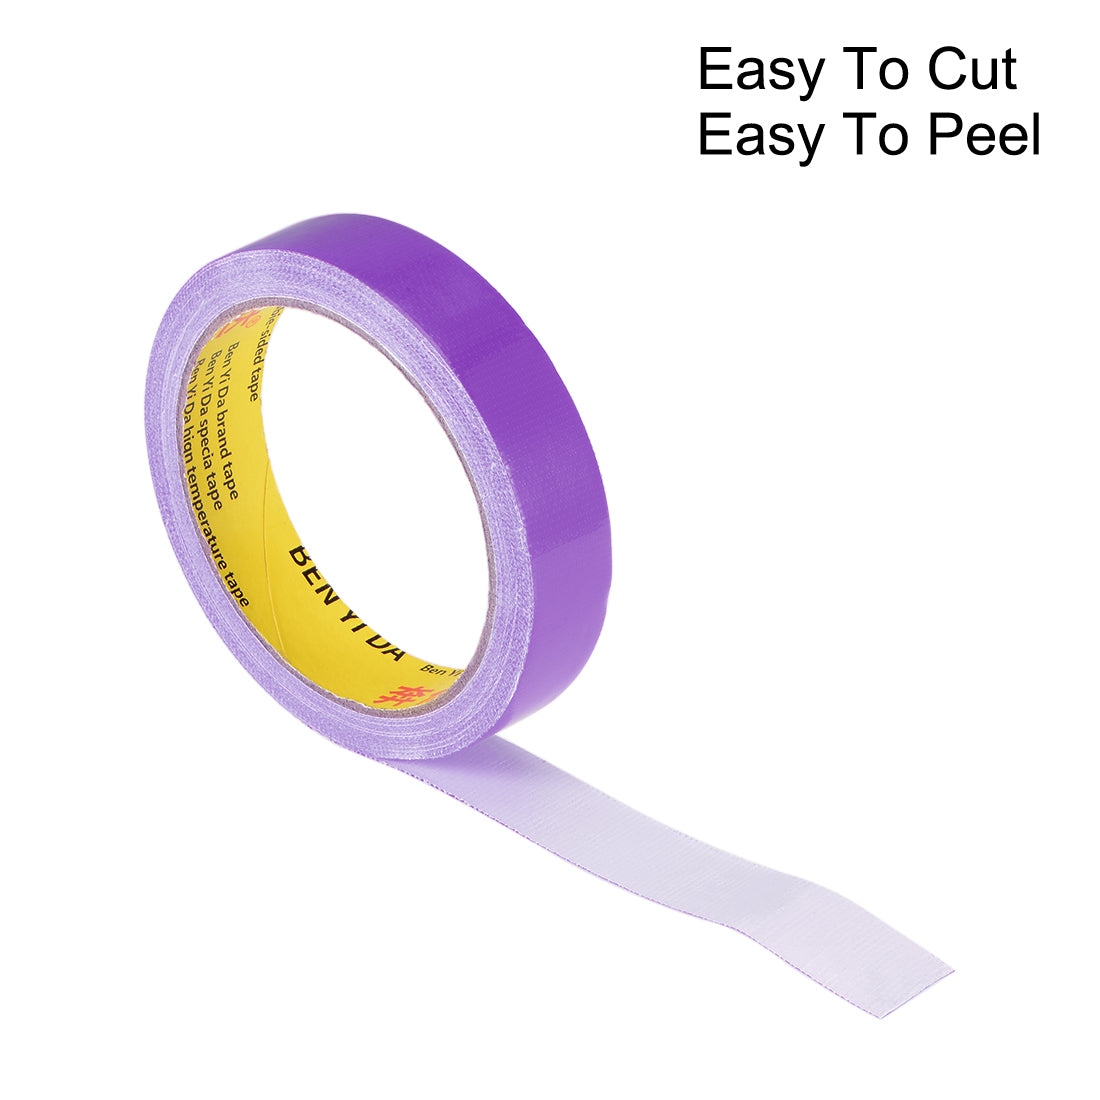 uxcell Uxcell Cloth Duct Tape Single Side Adhesive Tape Moisture-proof for Crafts, Home Improvement, Repairs, 33 Ft x 0.8 Inch(LxW), Purple